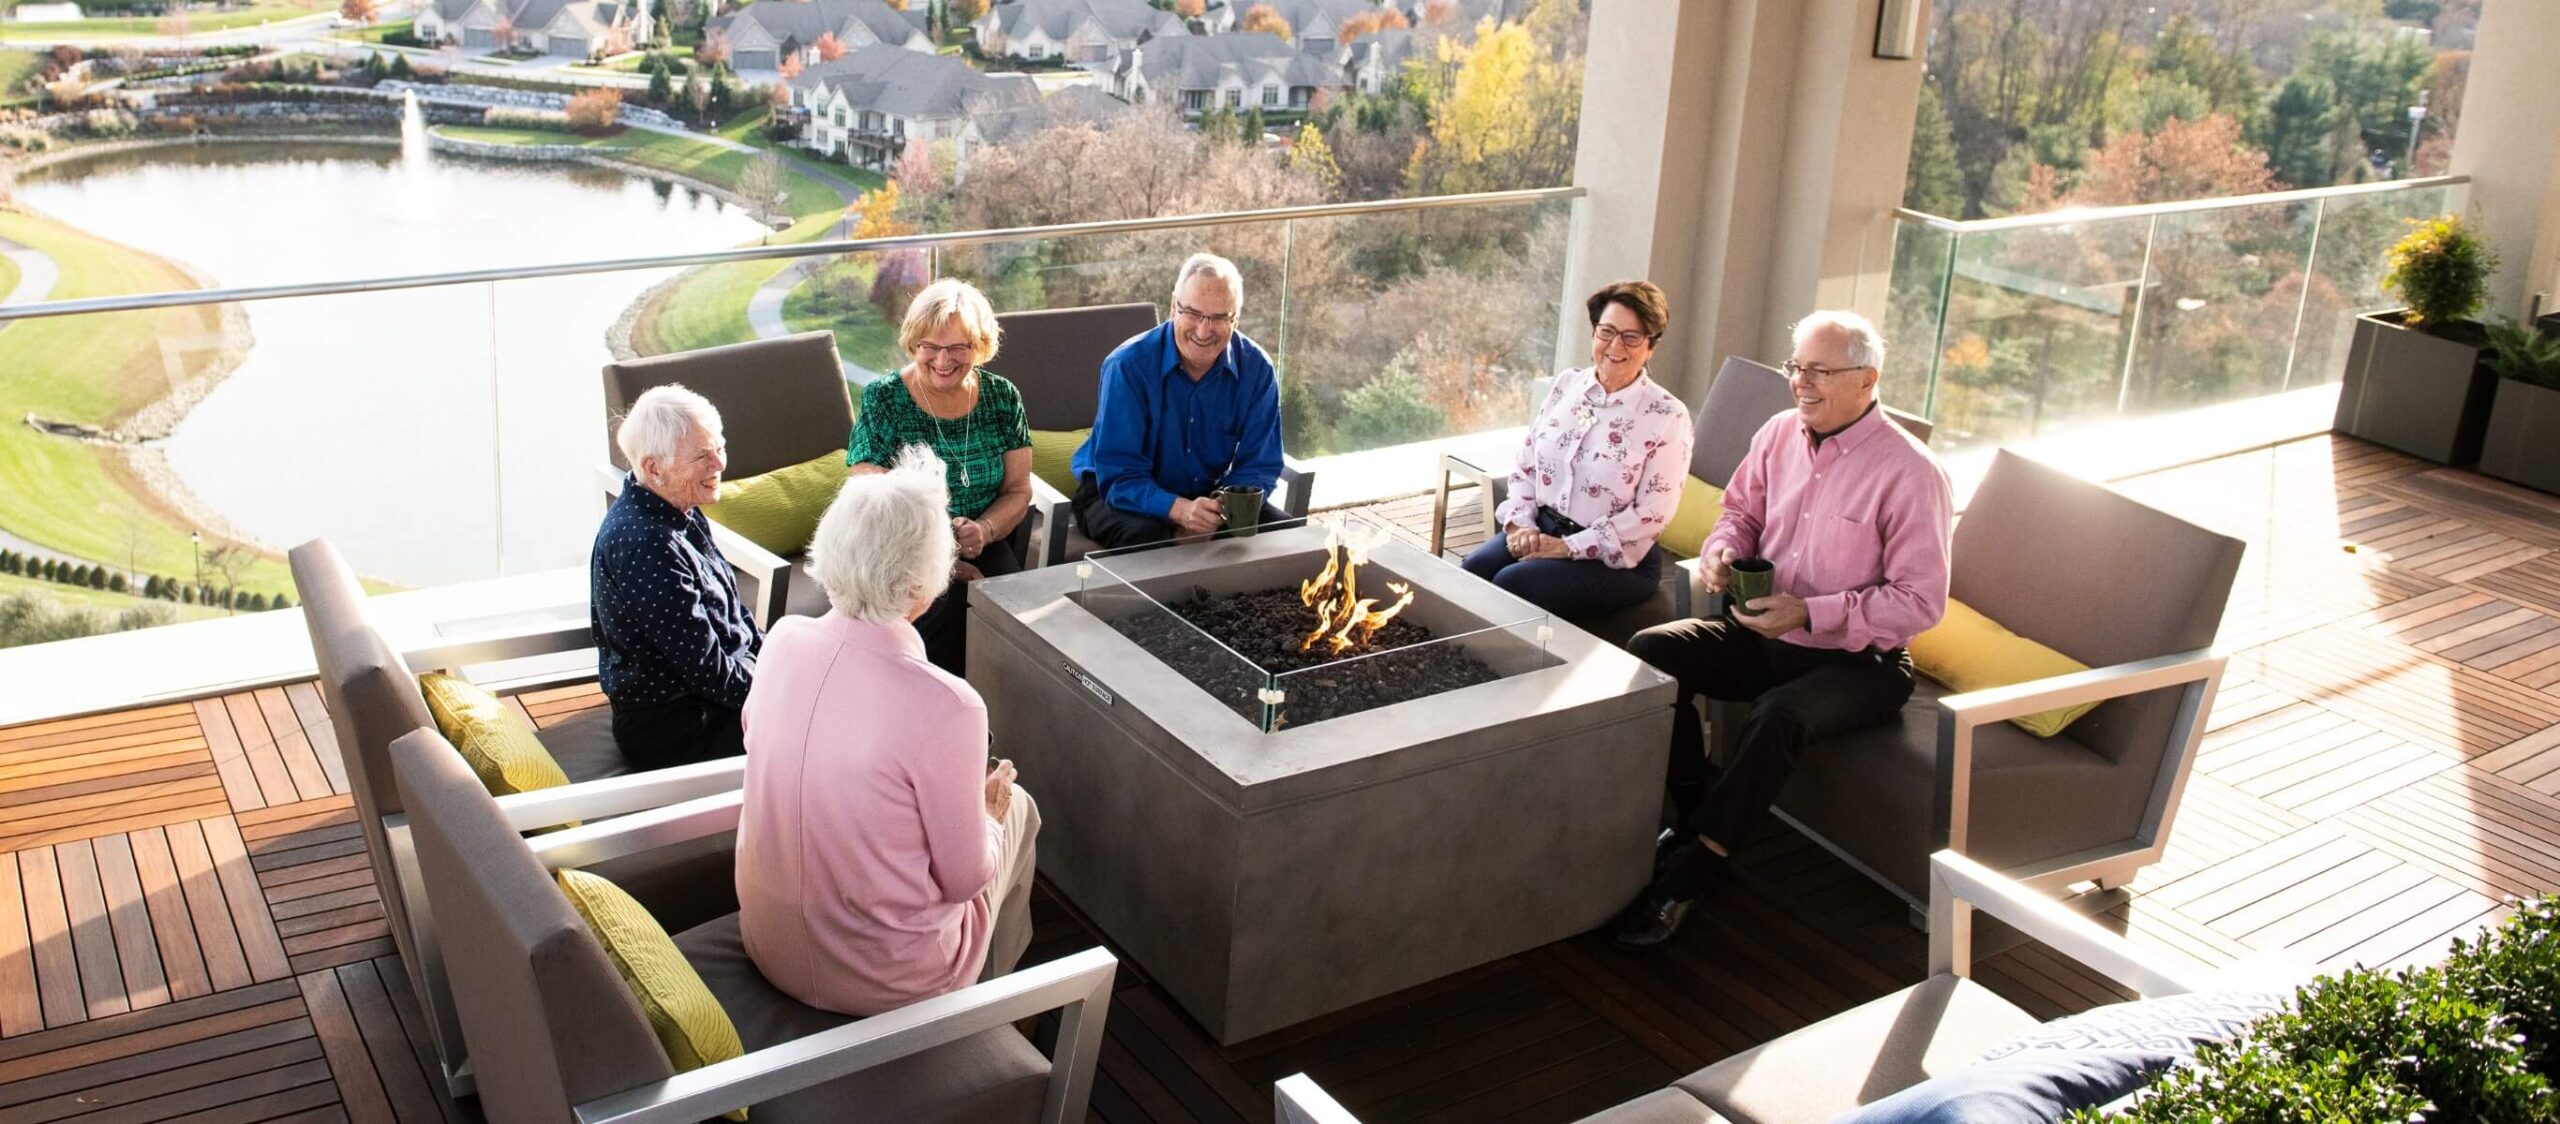 A group of elderly people enjoying independent living by sitting around a fire pit.